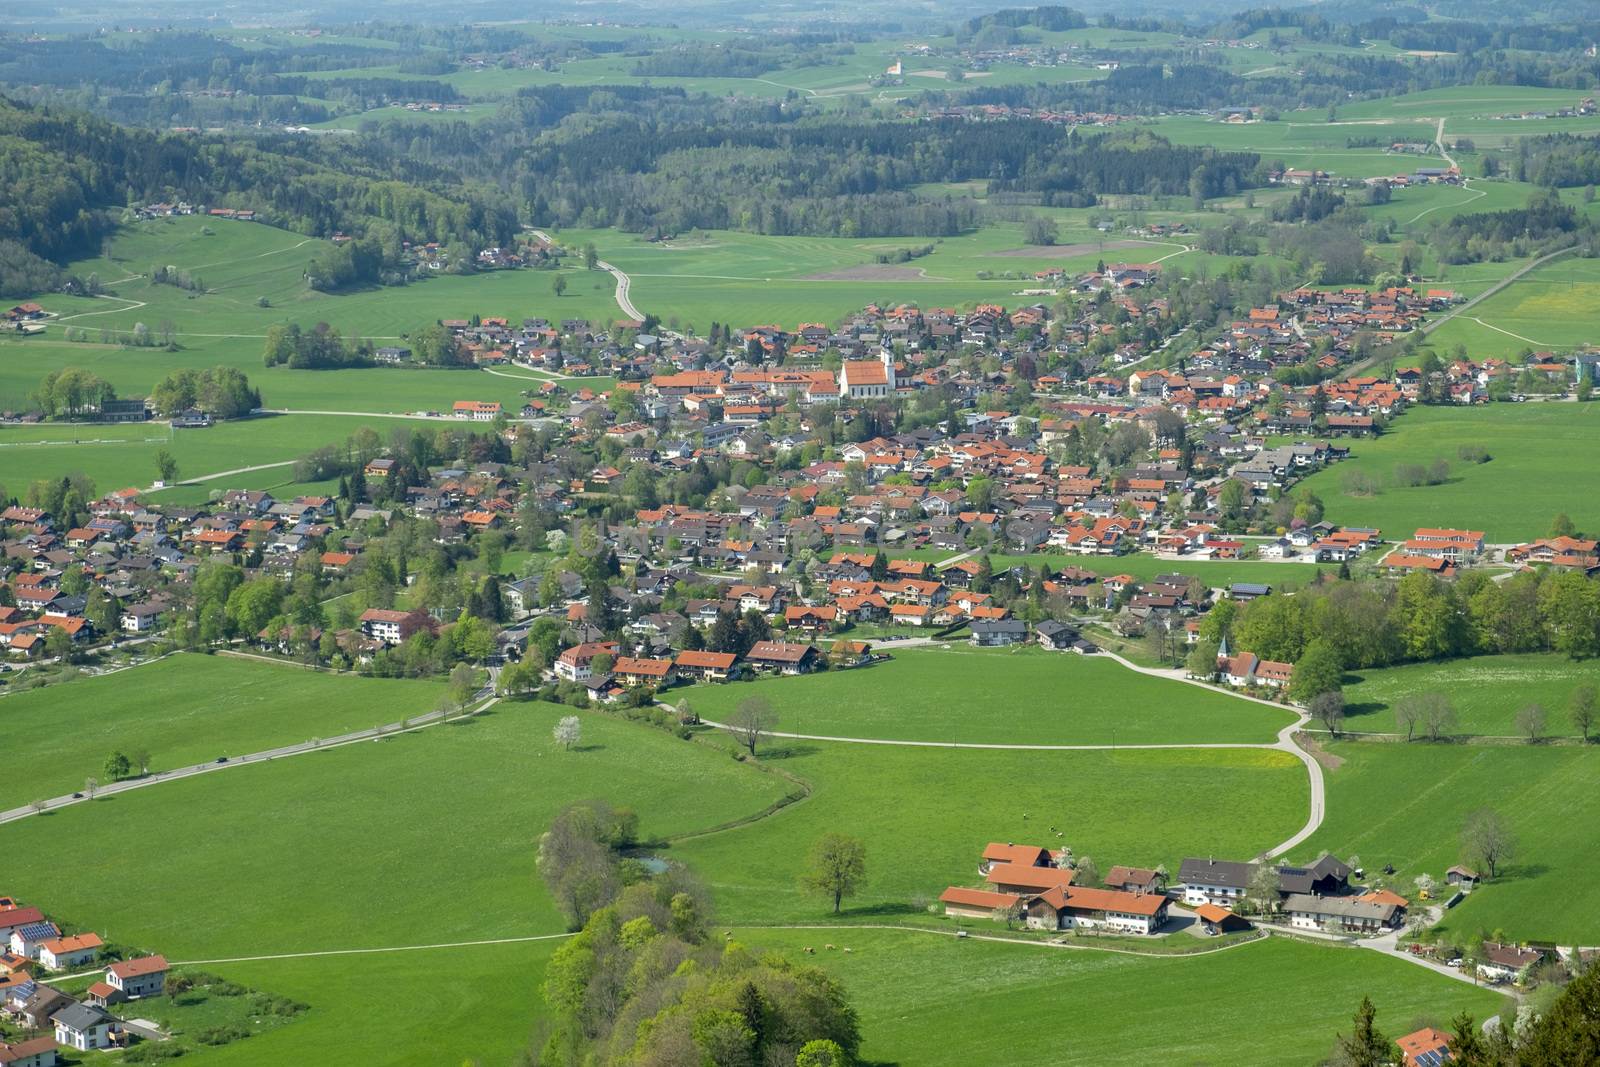 View from Kampenwand in spring